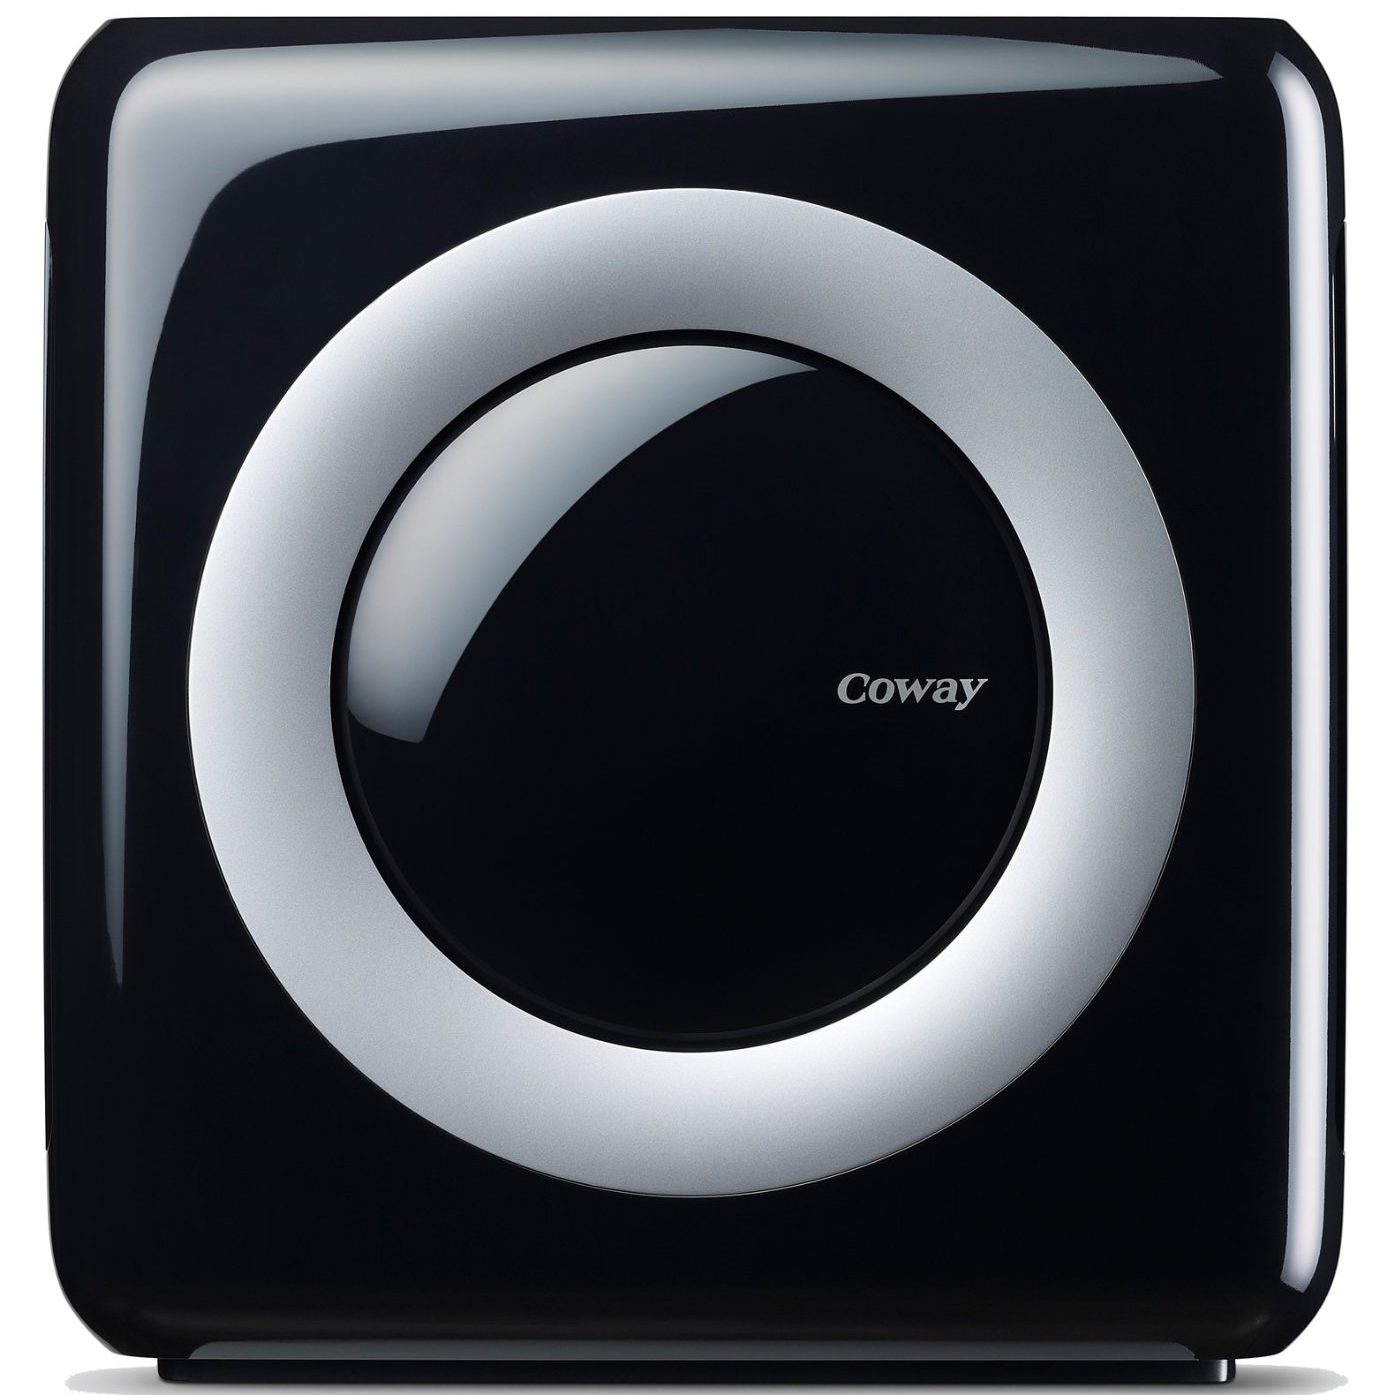 Coway mighty air purifier with Hepa filter for $137